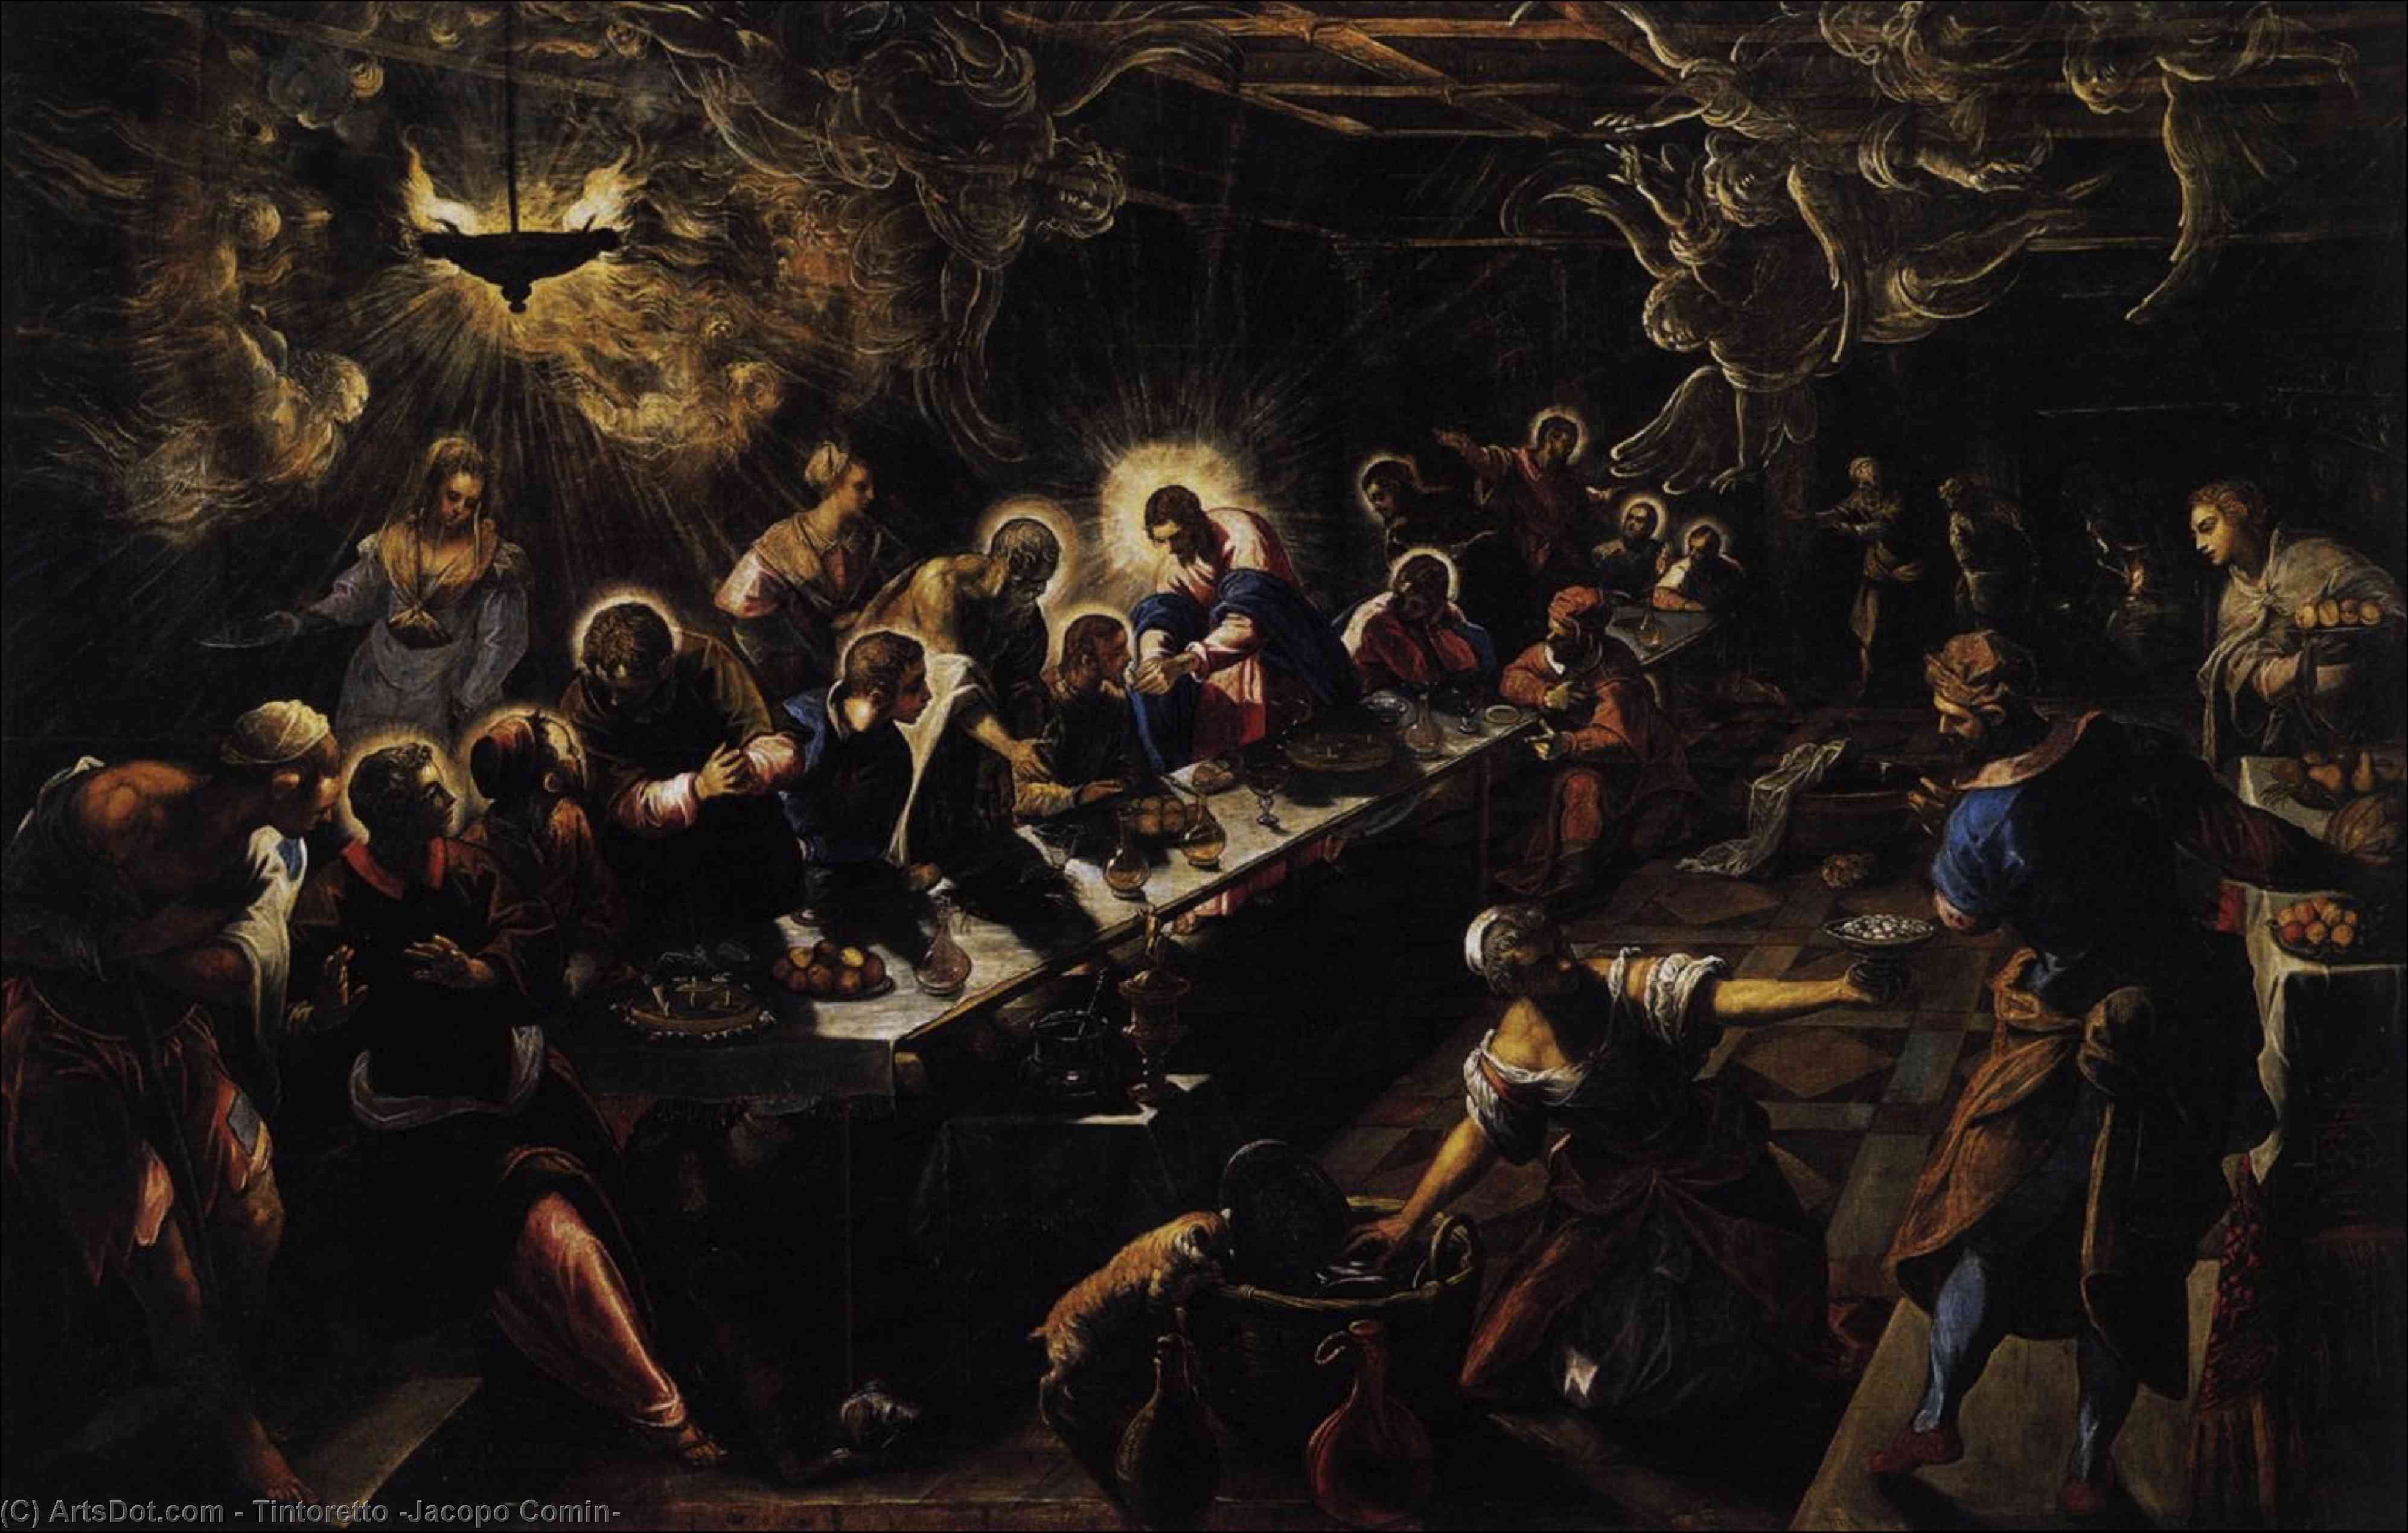 Order Oil Painting Replica The Last Supper, 1594 by Tintoretto (Jacopo Comin) (1518-1594, Italy) | ArtsDot.com